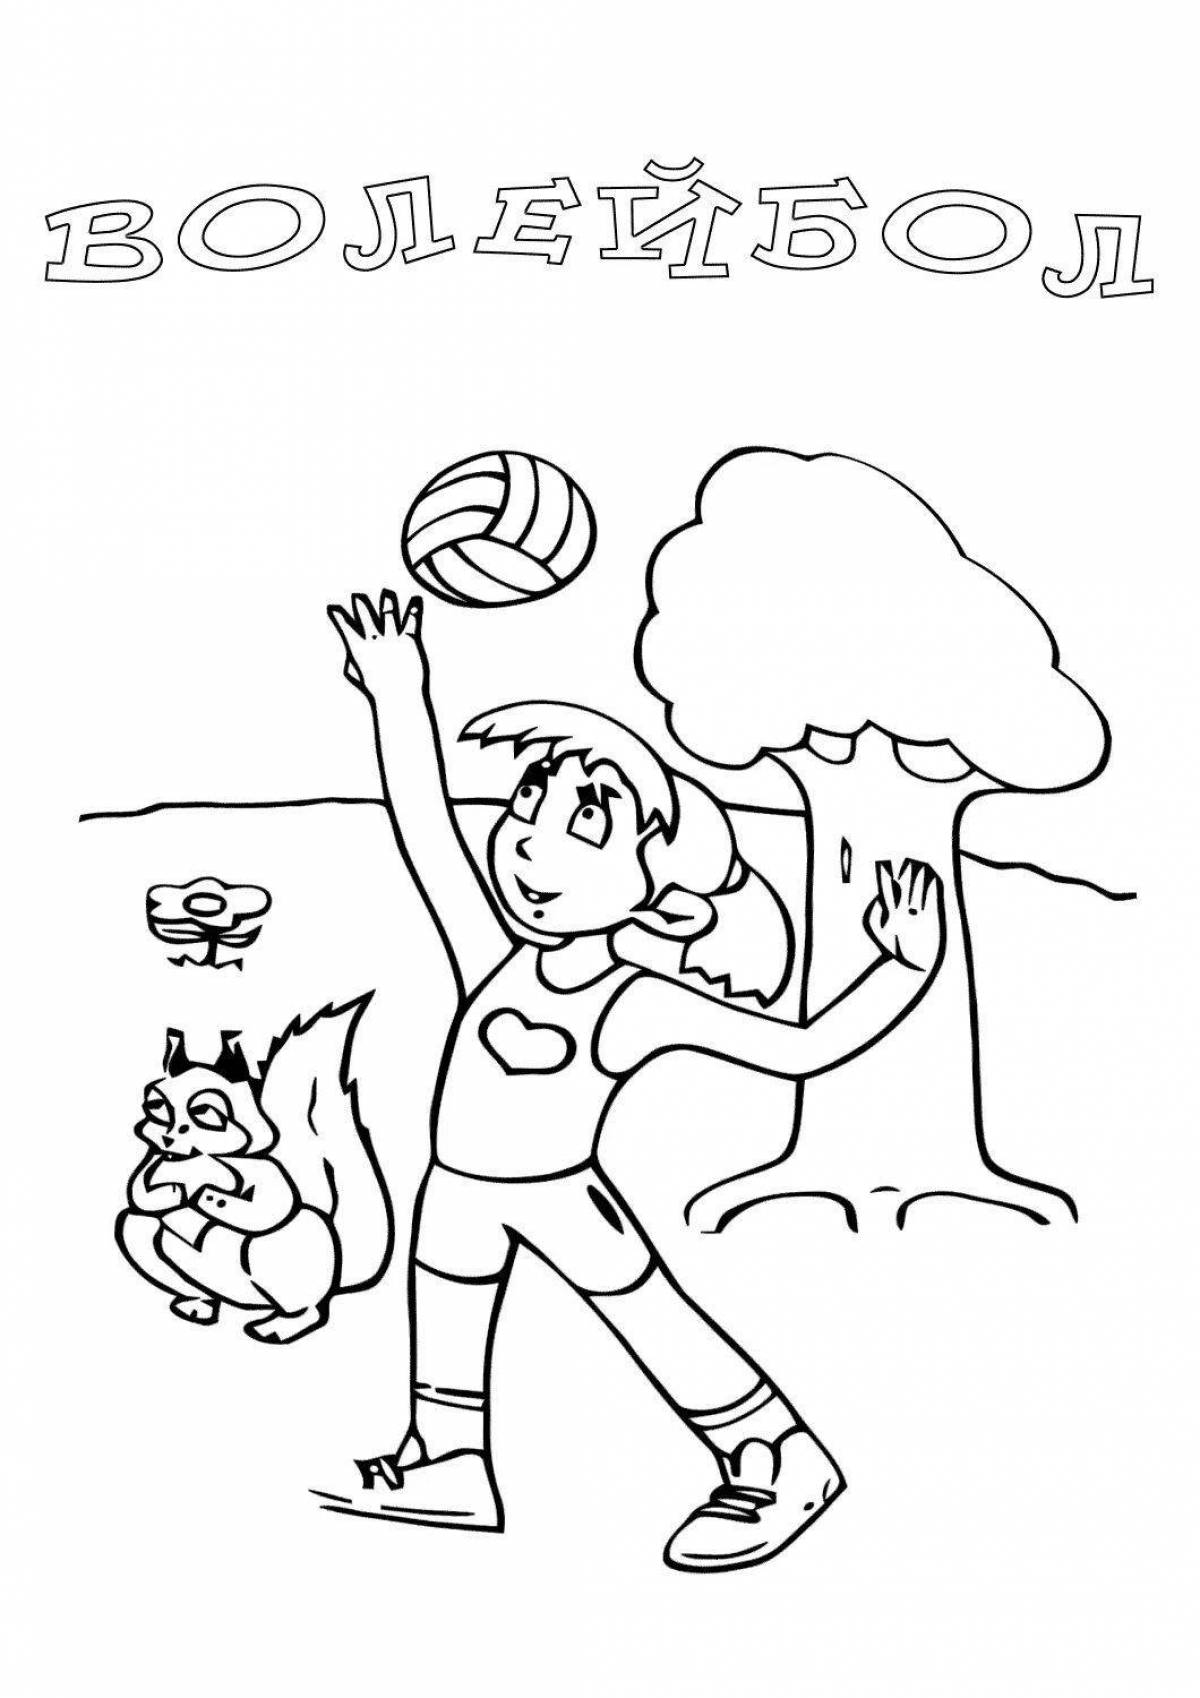 Coloring book about a healthy lifestyle for children